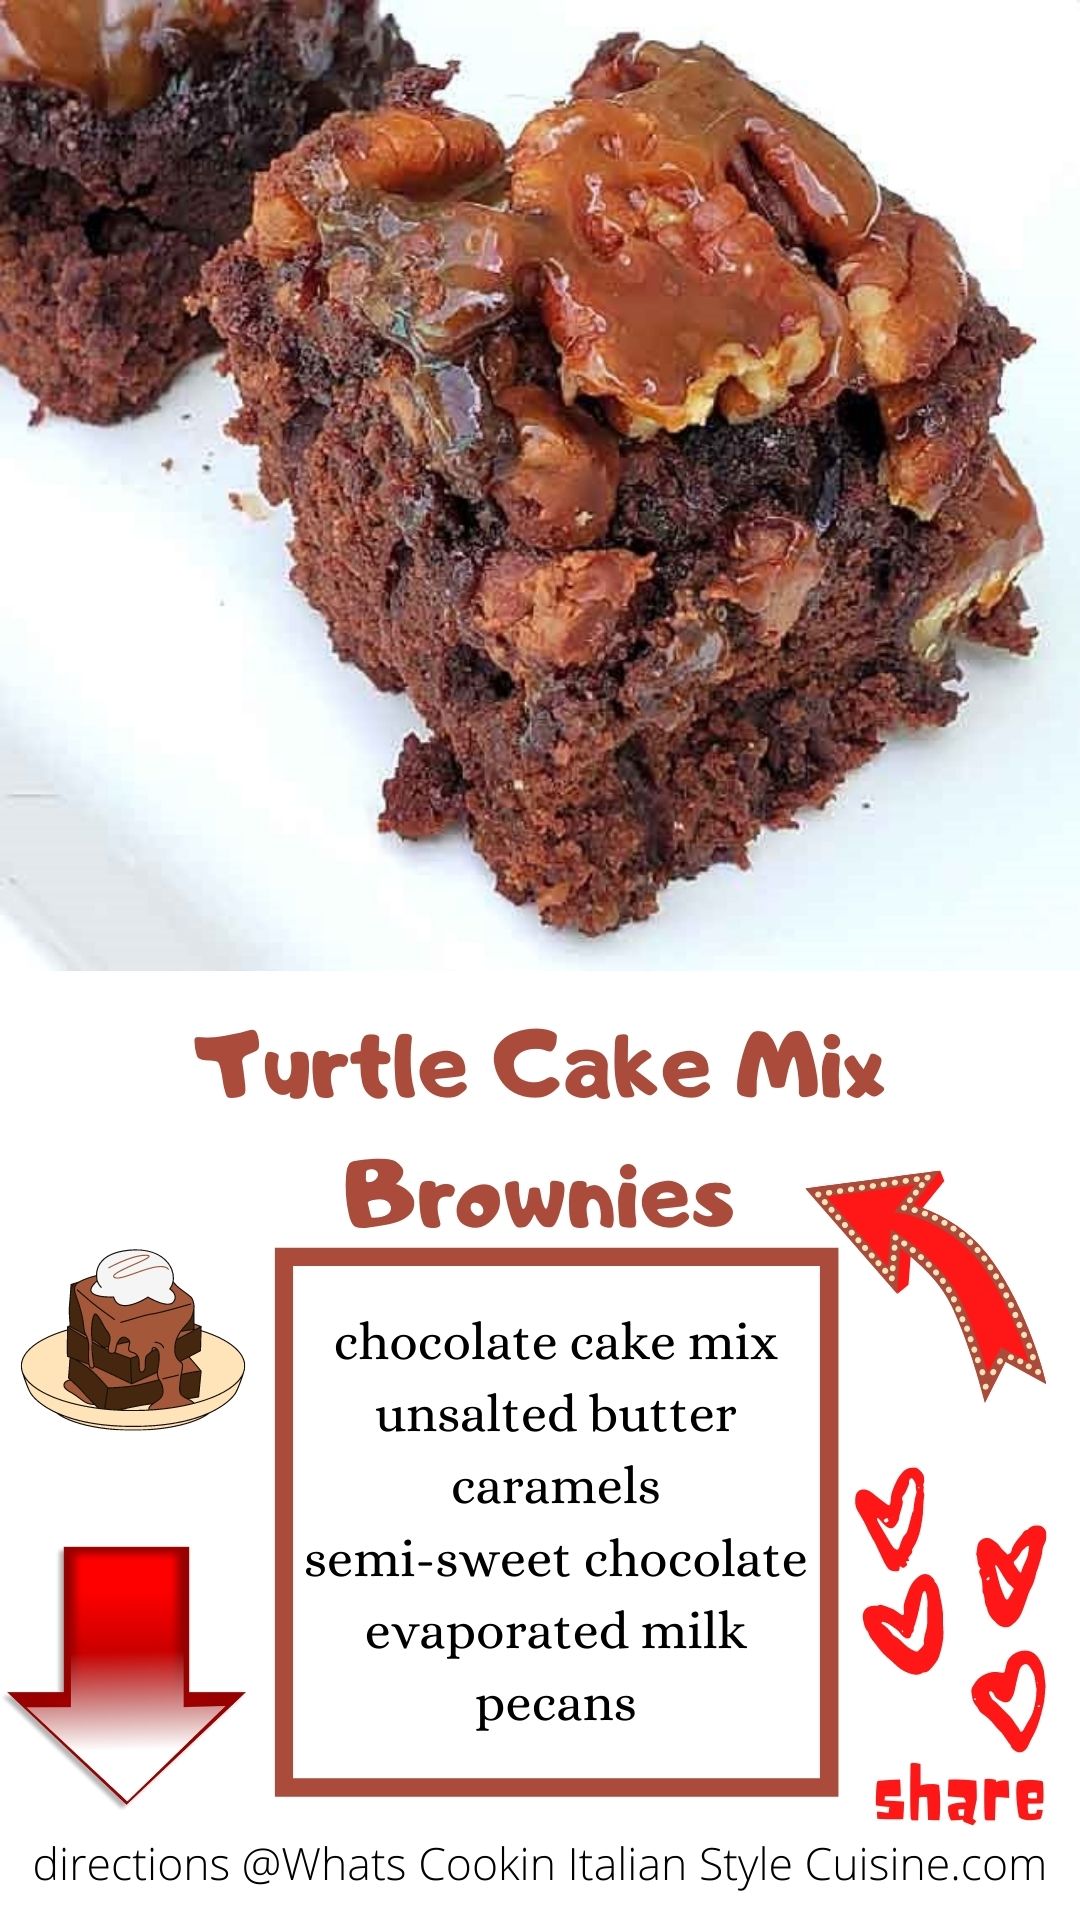 Betty's Time-Tested Turtle Cake - YouTube